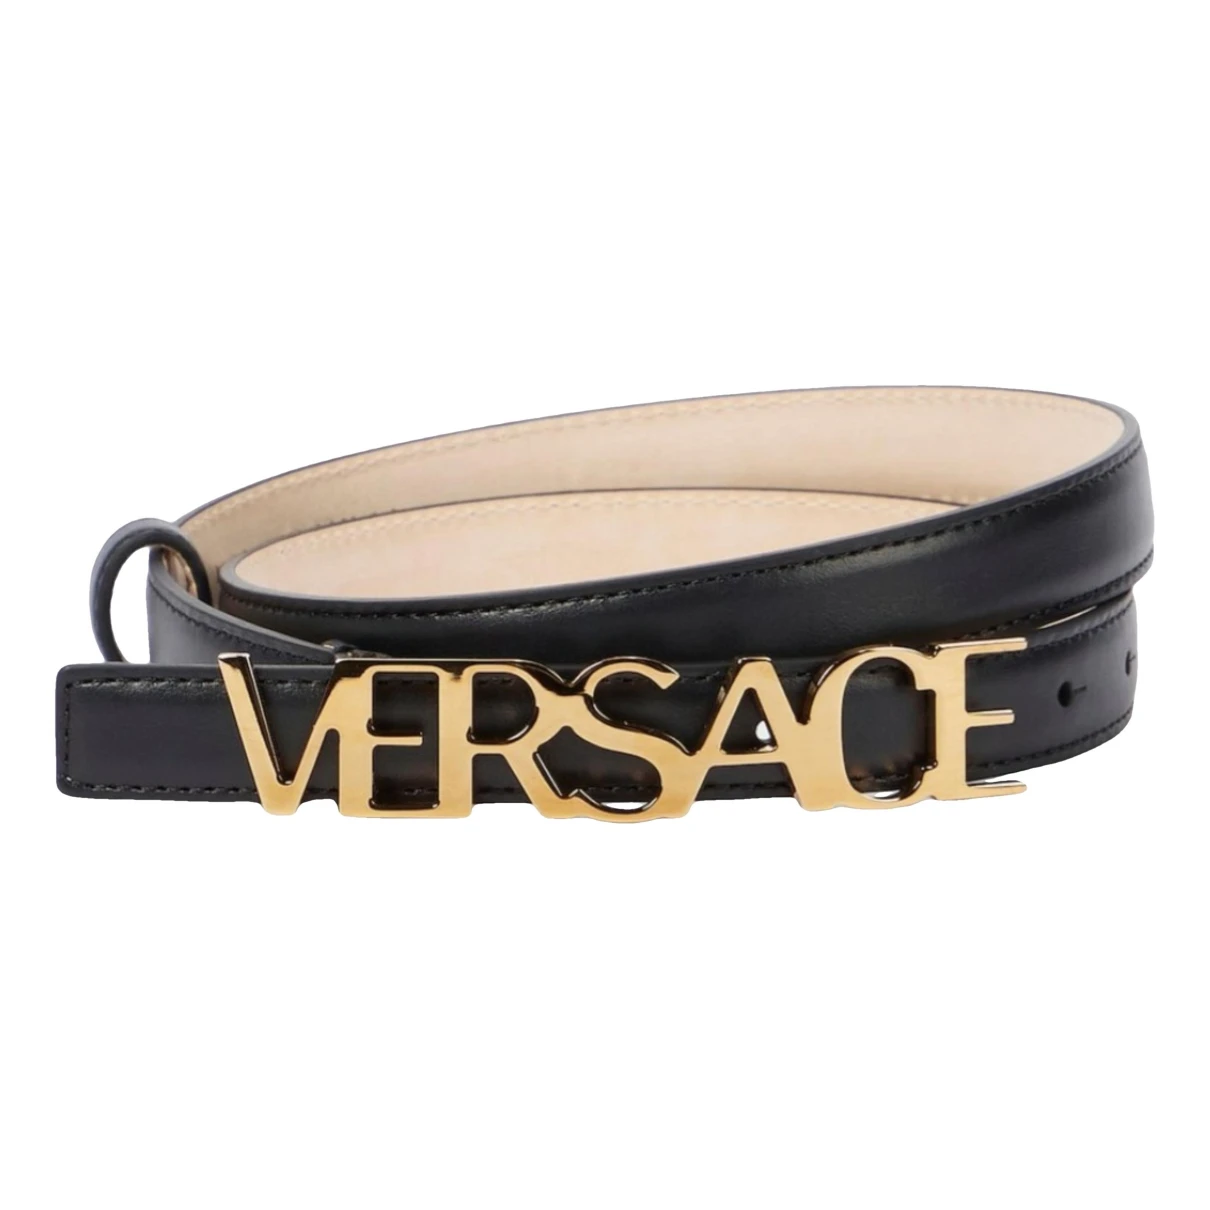 accessories Versace belts for Female Leather 70 cm. Used condition